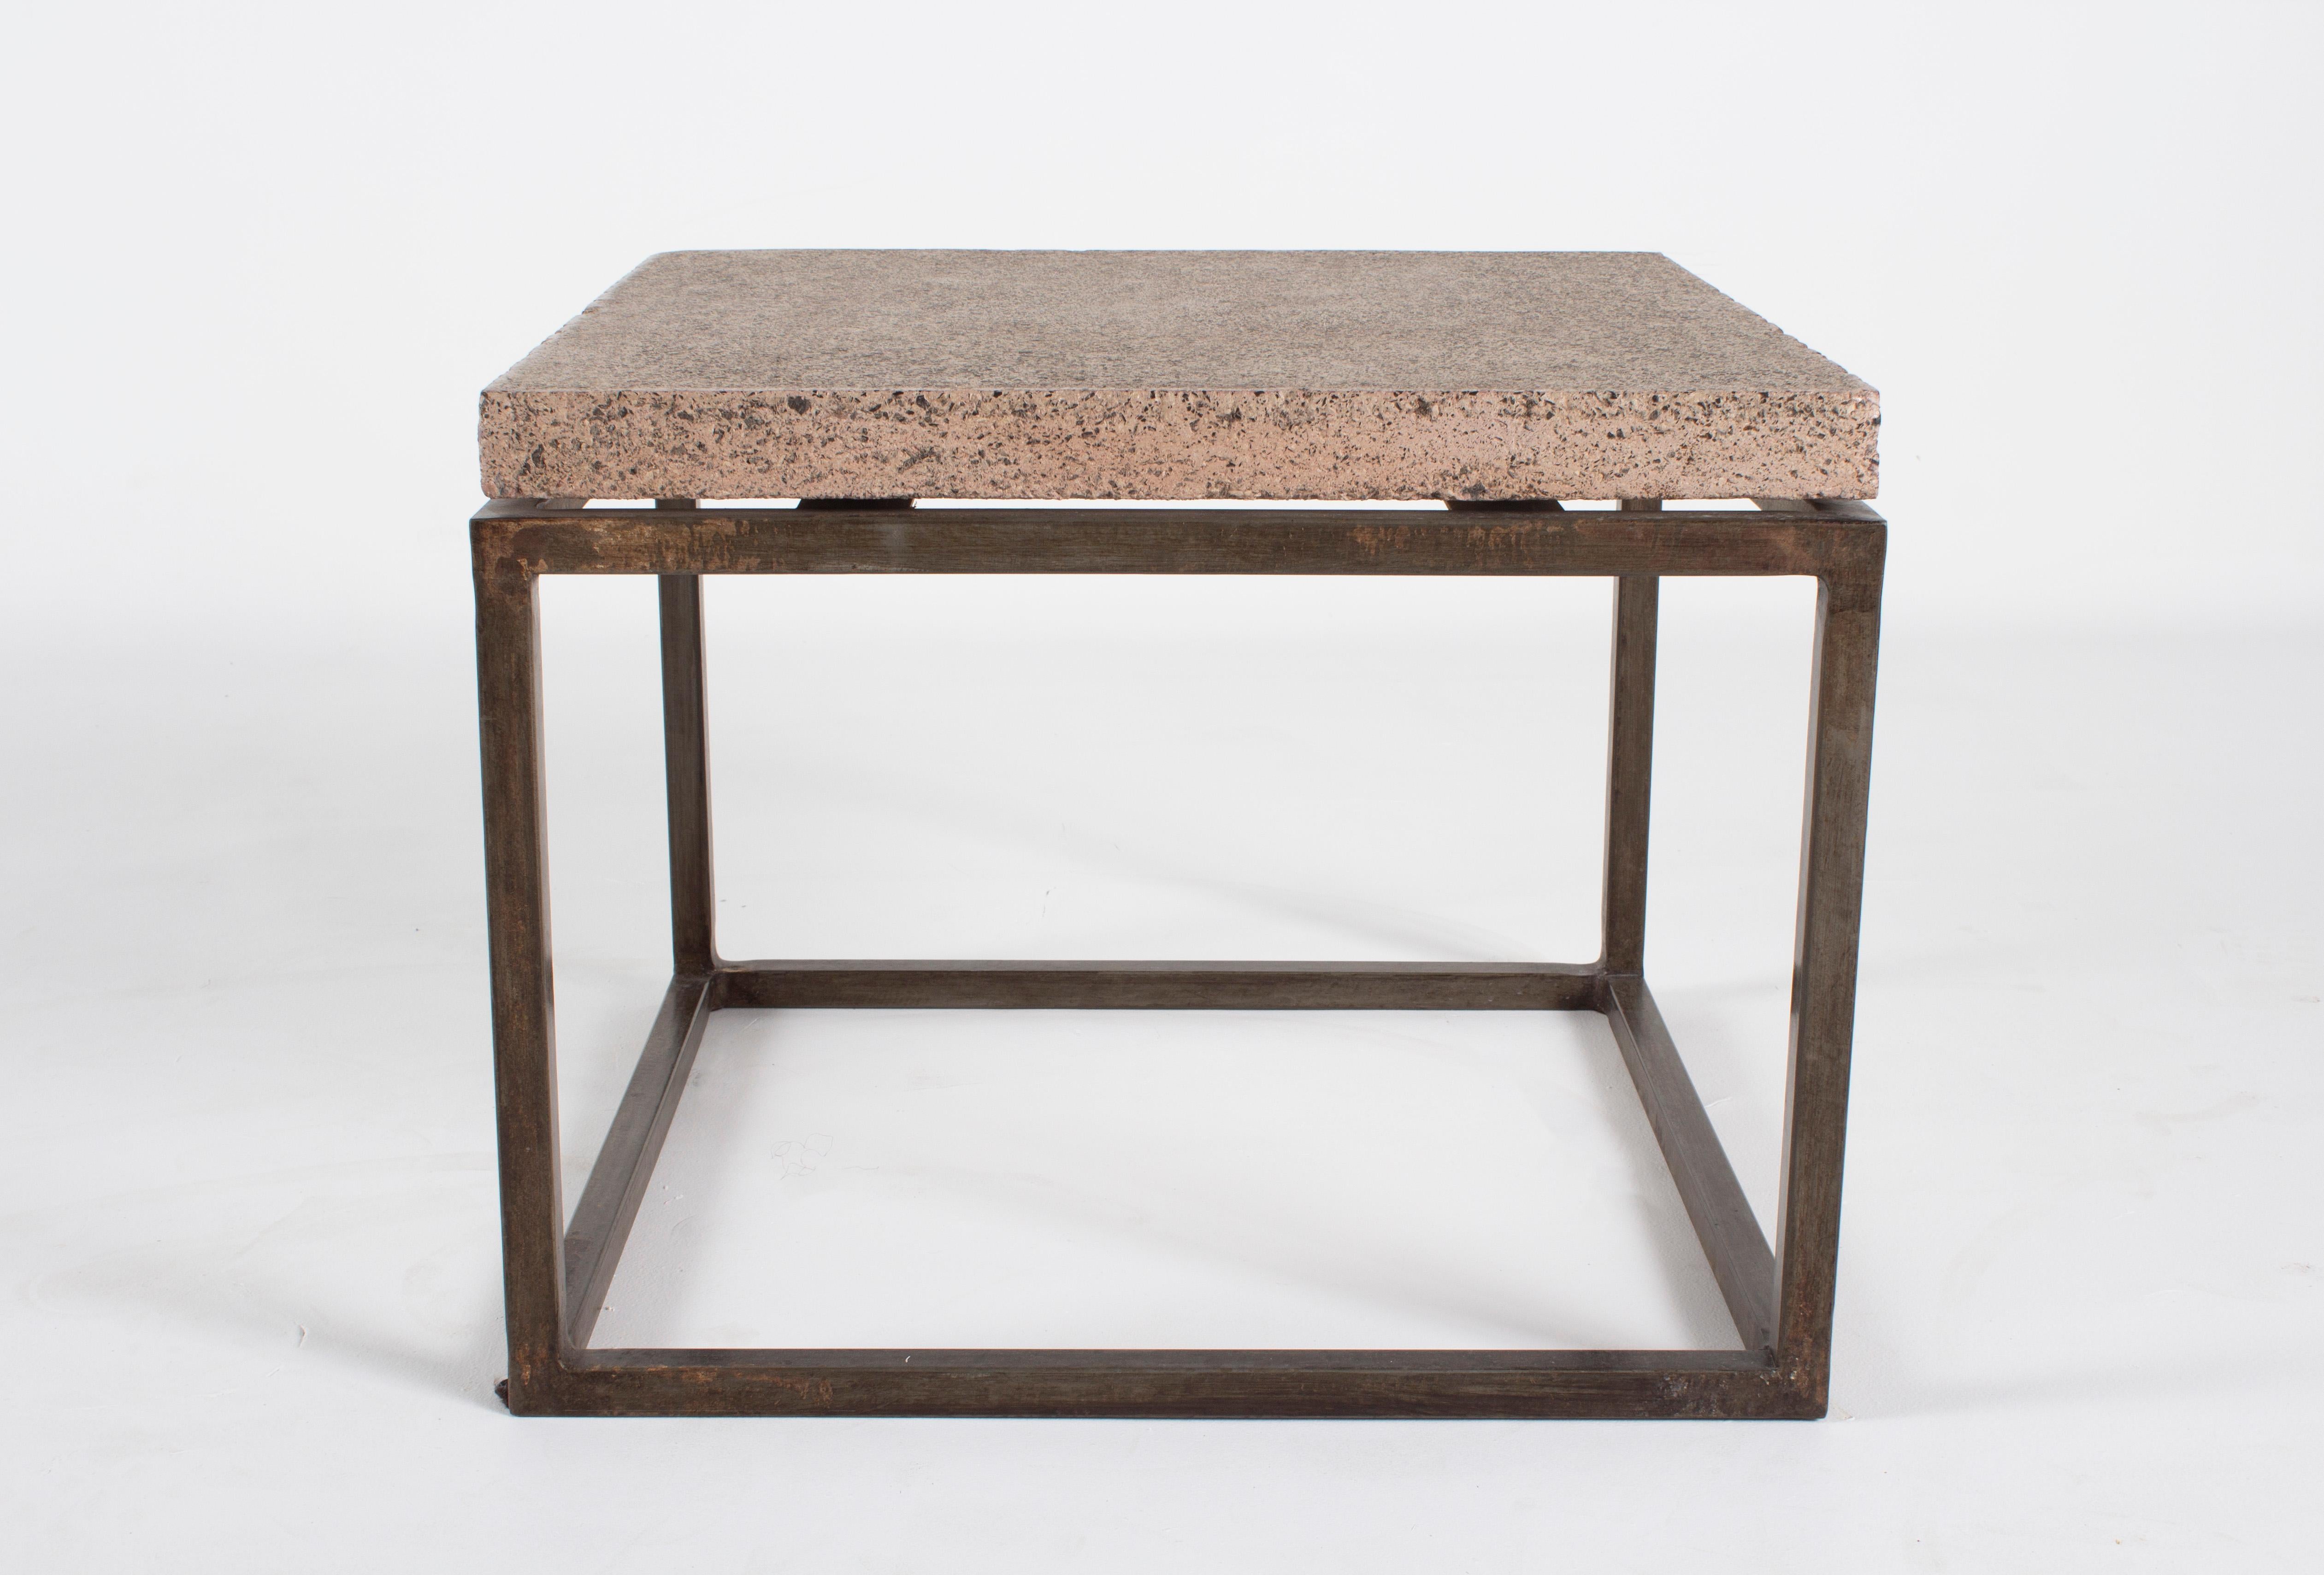 Vintage paver stone top on metal steel base, end table. In my organic, contemporary, vintage and mid-century modern aesthetic.